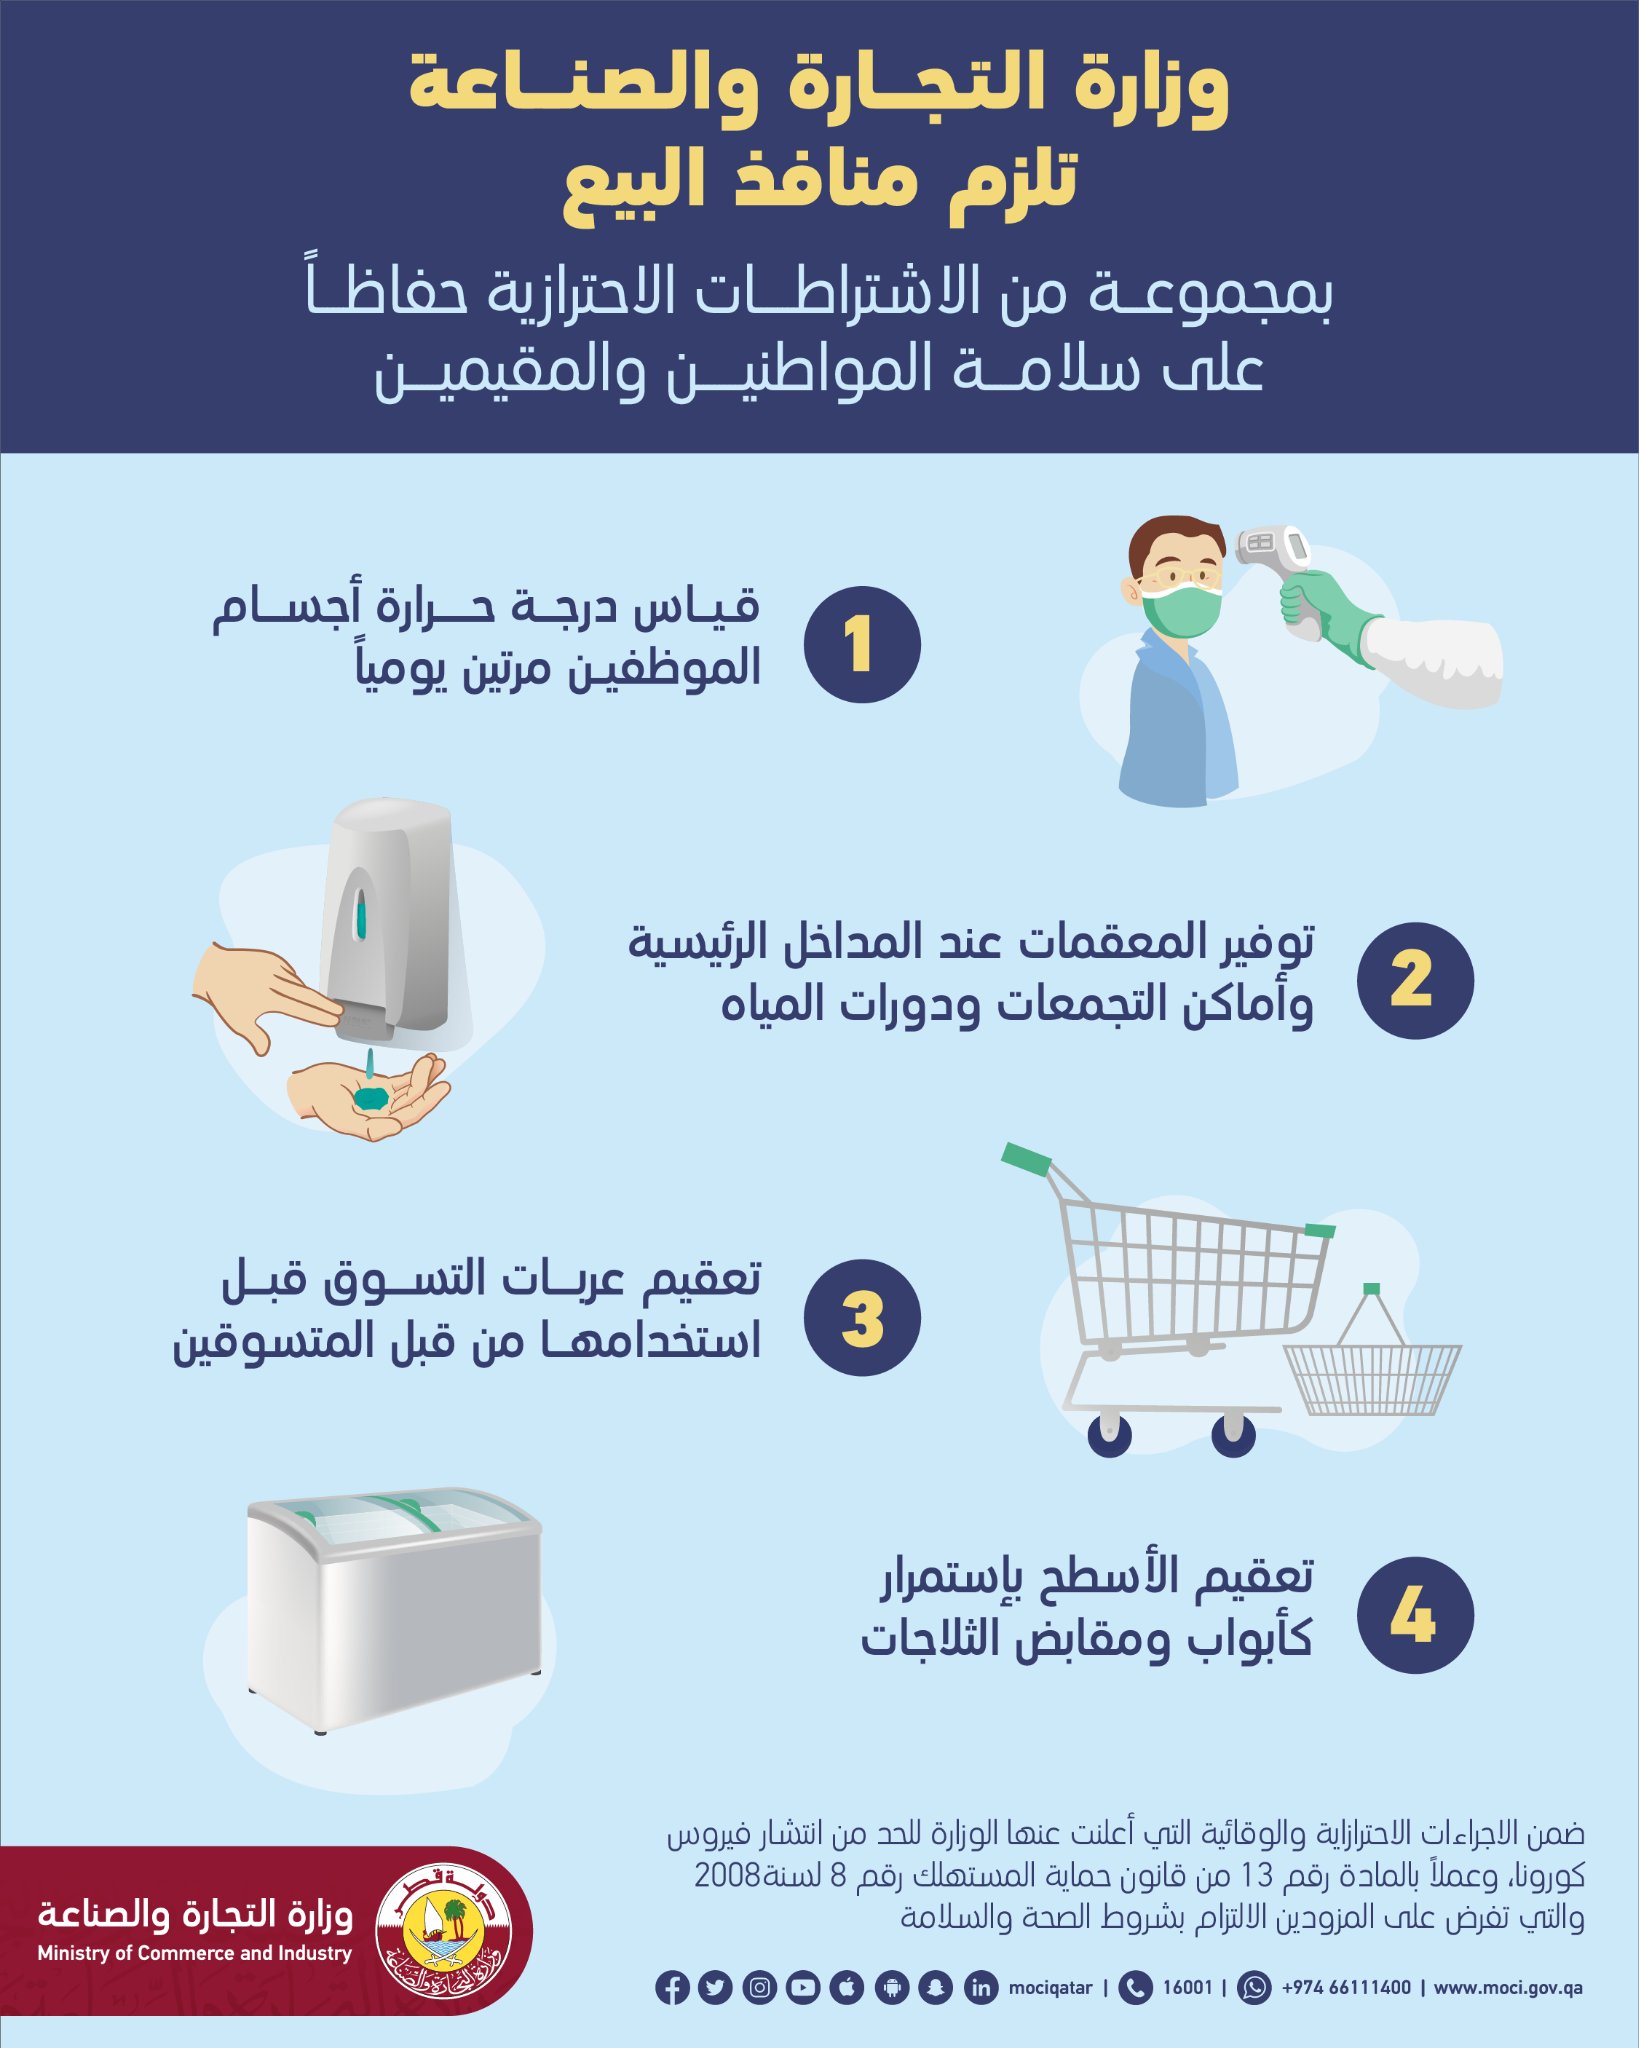 Ministry compels retail outlets to abide by set of precautionary conditions to protect safety of citizens and residents